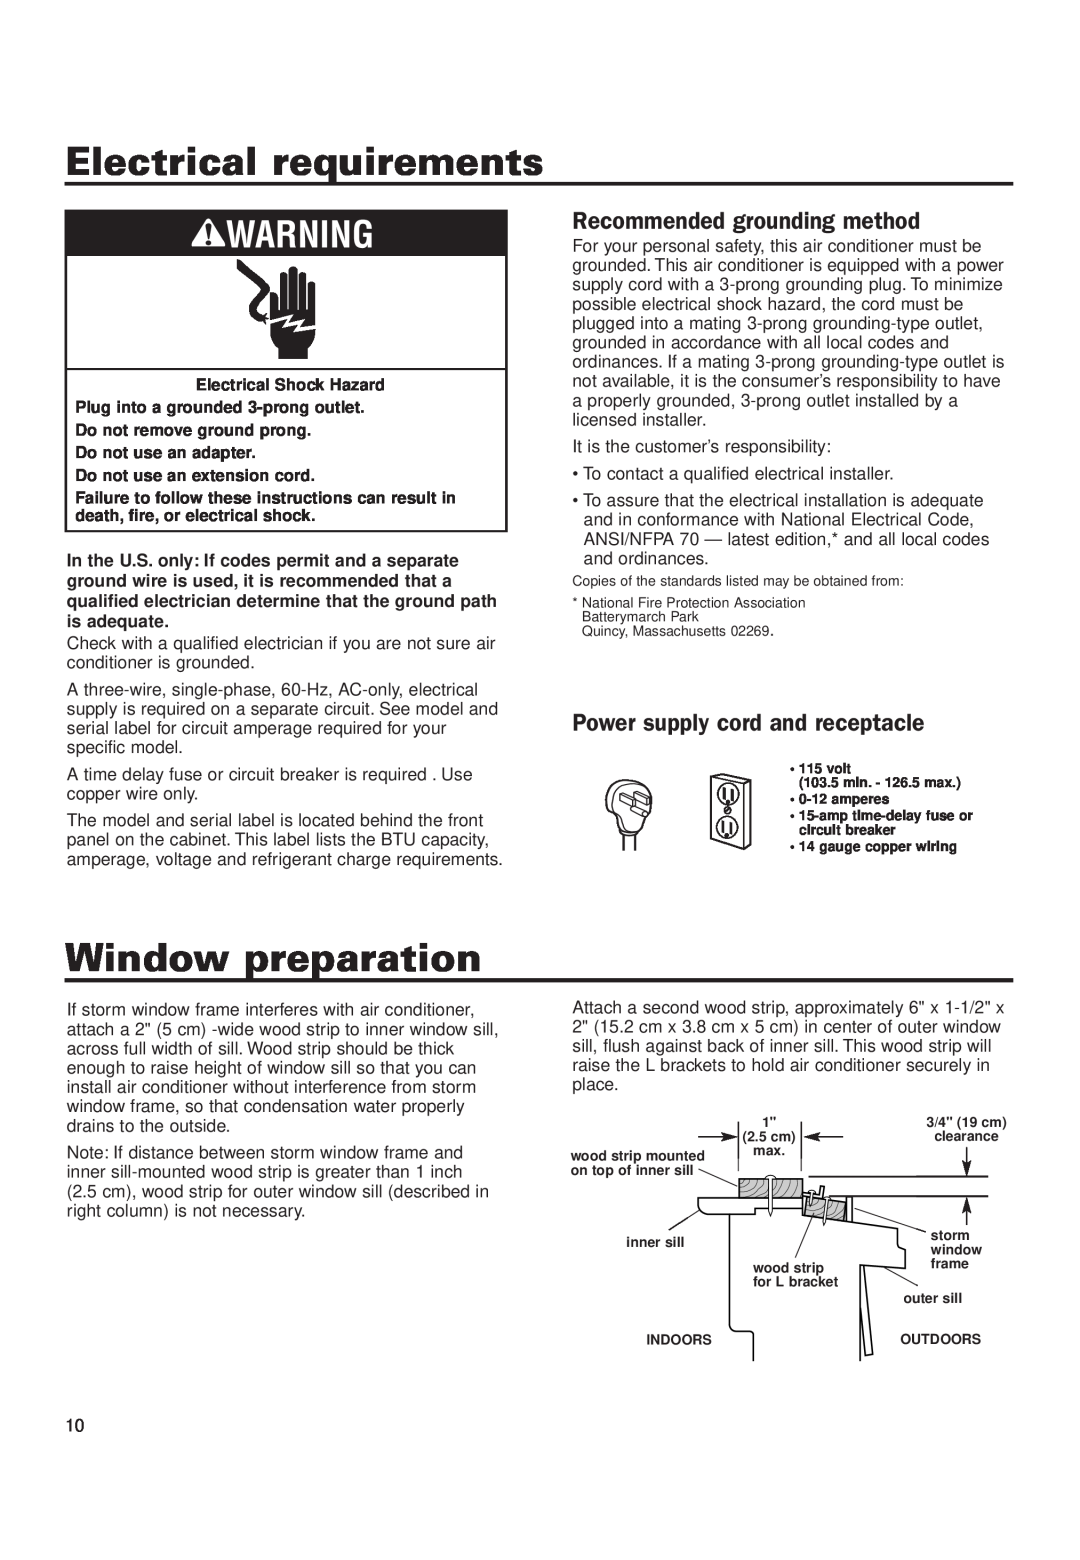 Whirlpool CA5WMK0 installation instructions Electrical requirements, Window preparation, Recommended grounding method 